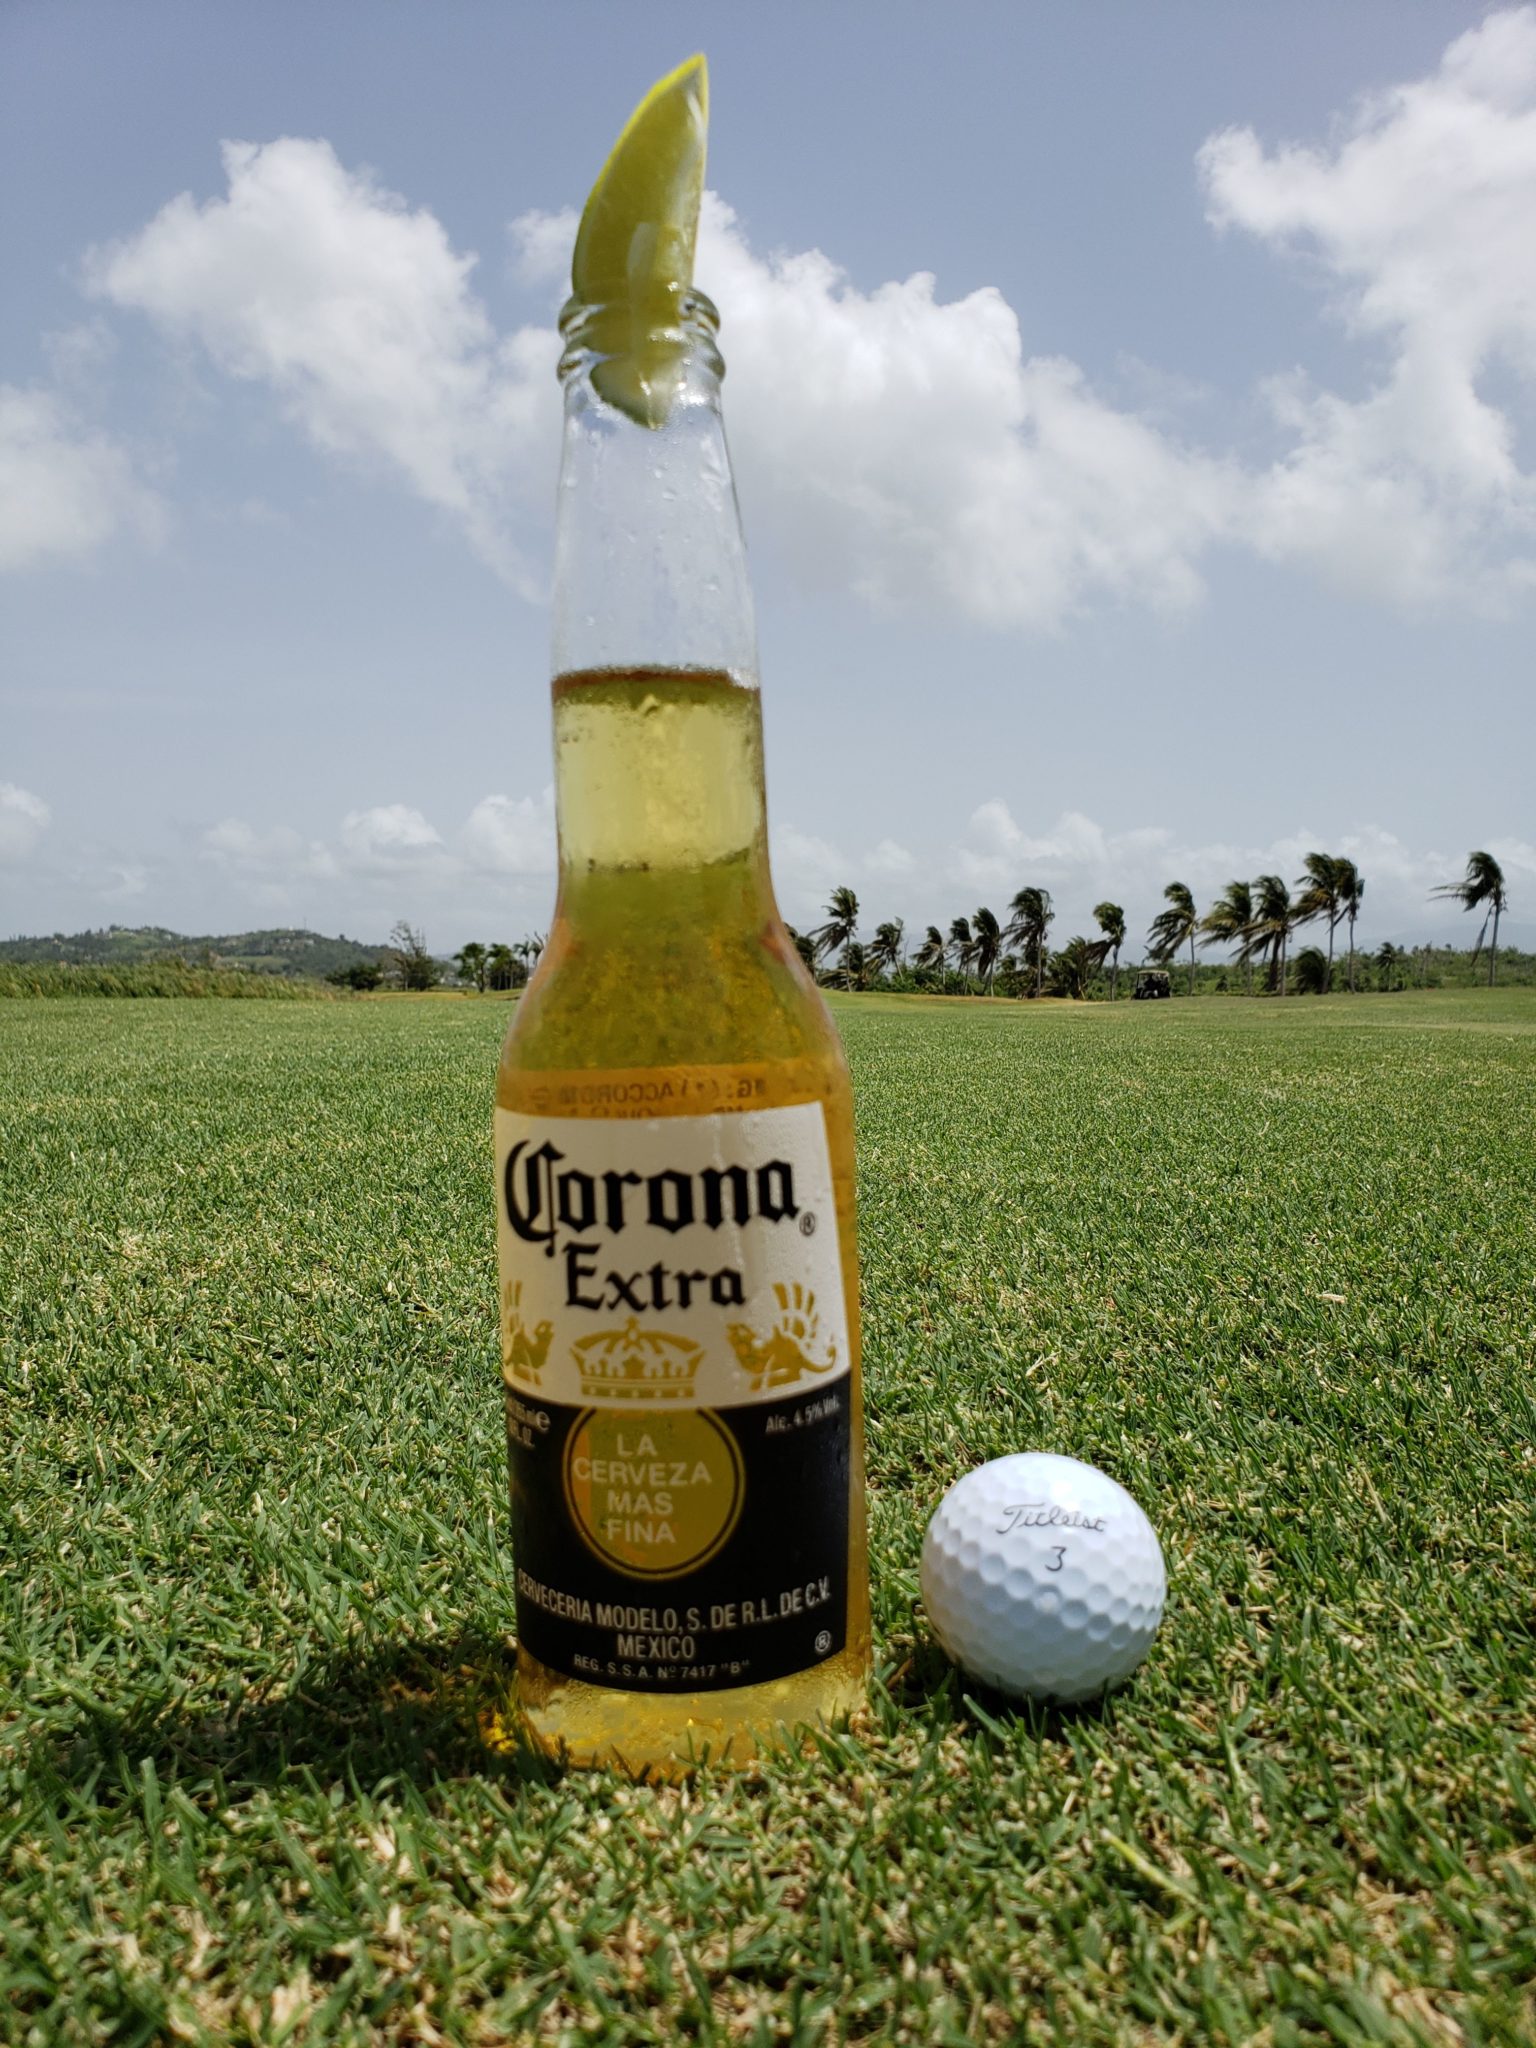 a beer bottle and golf ball on a golf course